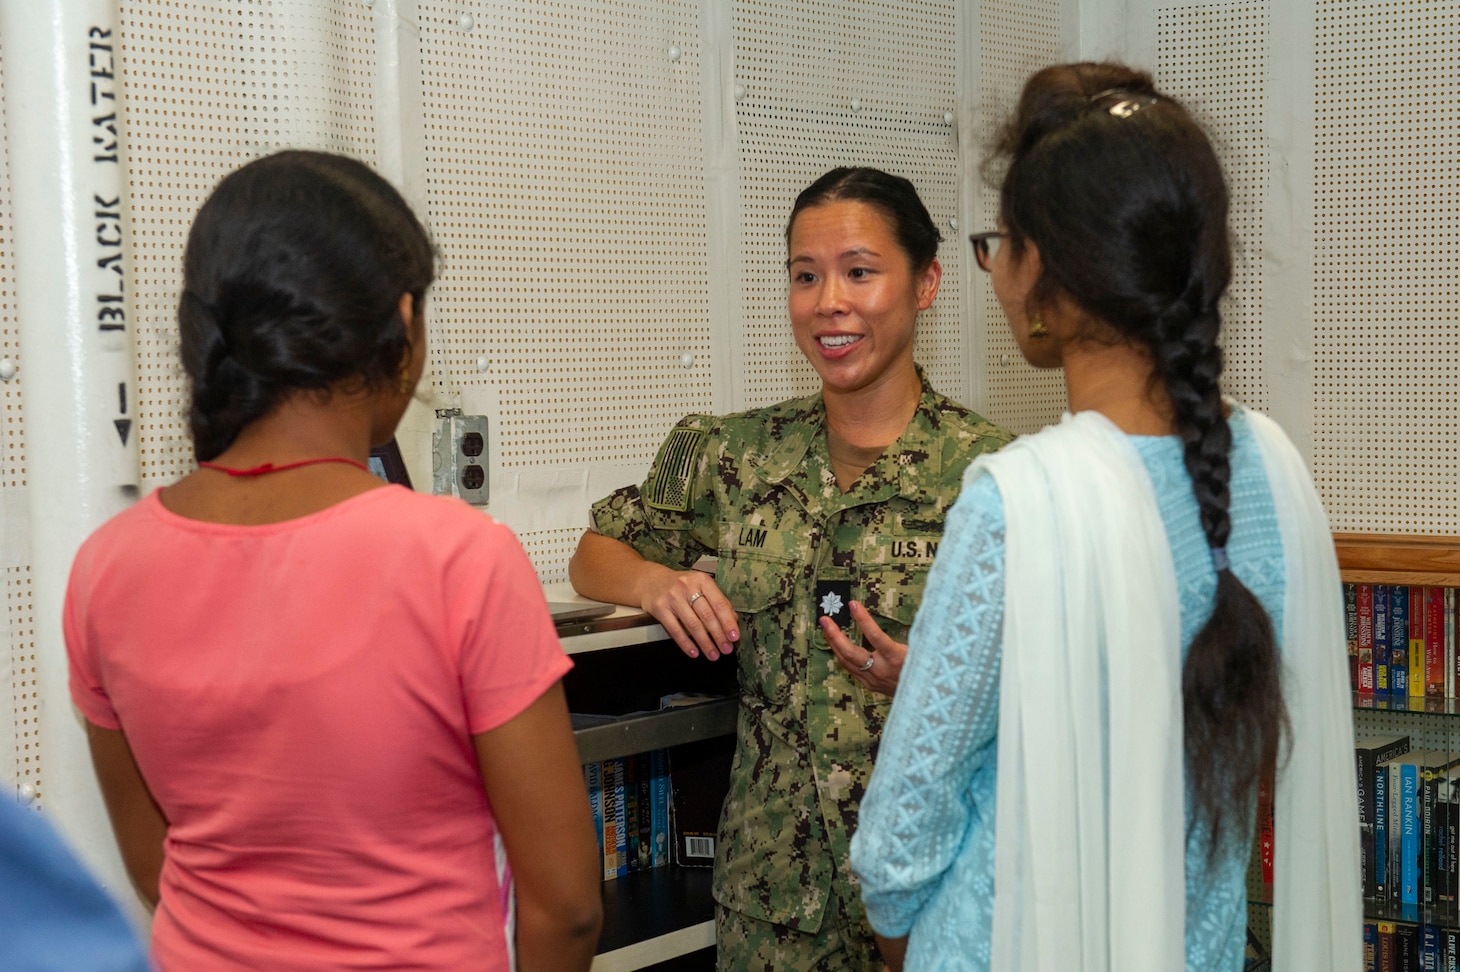 VISAKHAPATNAM, India (Aug. 2, 2022) – Cmdr. Doris Lam, the dental officer aboard the Emory S. Land-class submarine tender USS Frank Cable (AS 40), speaks with students from St. Joseph’s College for Women during a tour of the ship while moored in Visakhapatnam, India, Aug. 2, 2022. Frank Cable is currently on patrol conducting expeditionary maintenance and logistics in the 7th Fleet area of operations in support of a free and open Indo-Pacific. (U.S. Navy photo by Mass Communication Specialist 2nd Class Kaitlyn E. Eads)